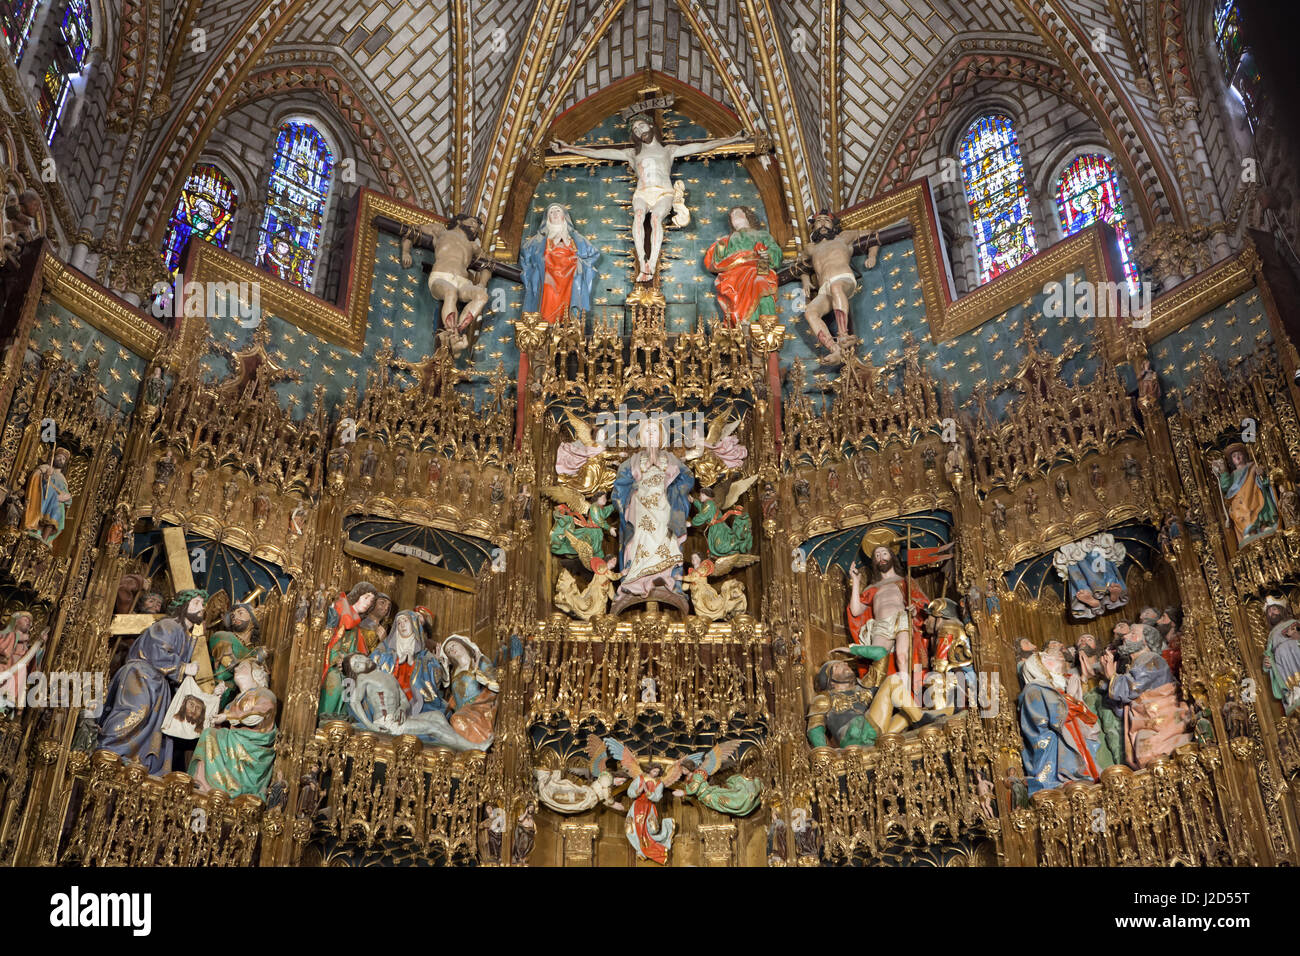 Gothic retablo in the Capilla Mayor (main chapel) in the Toledo Cathedral in Toledo, Spain. Late Gothic wooden retablo (retable altarpiece) was carved from 1497 to 1504 by Spanish sculptor Enrique Egas and Pedro de Gumiel among the others. Stock Photo